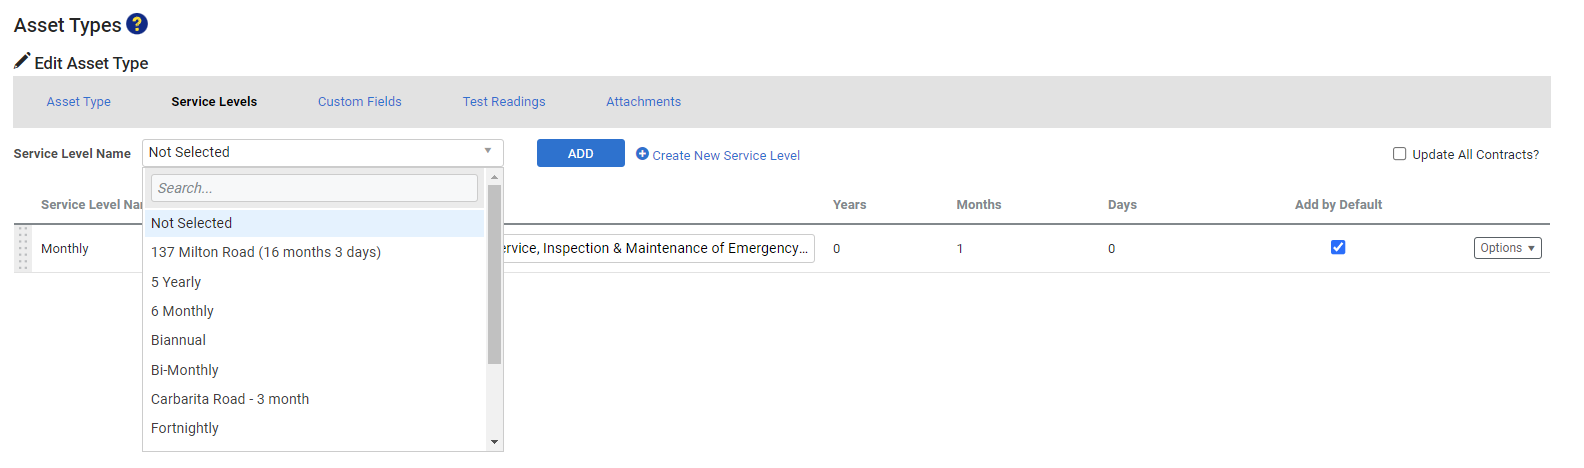 A screenshot of service levels being added to an asset type.